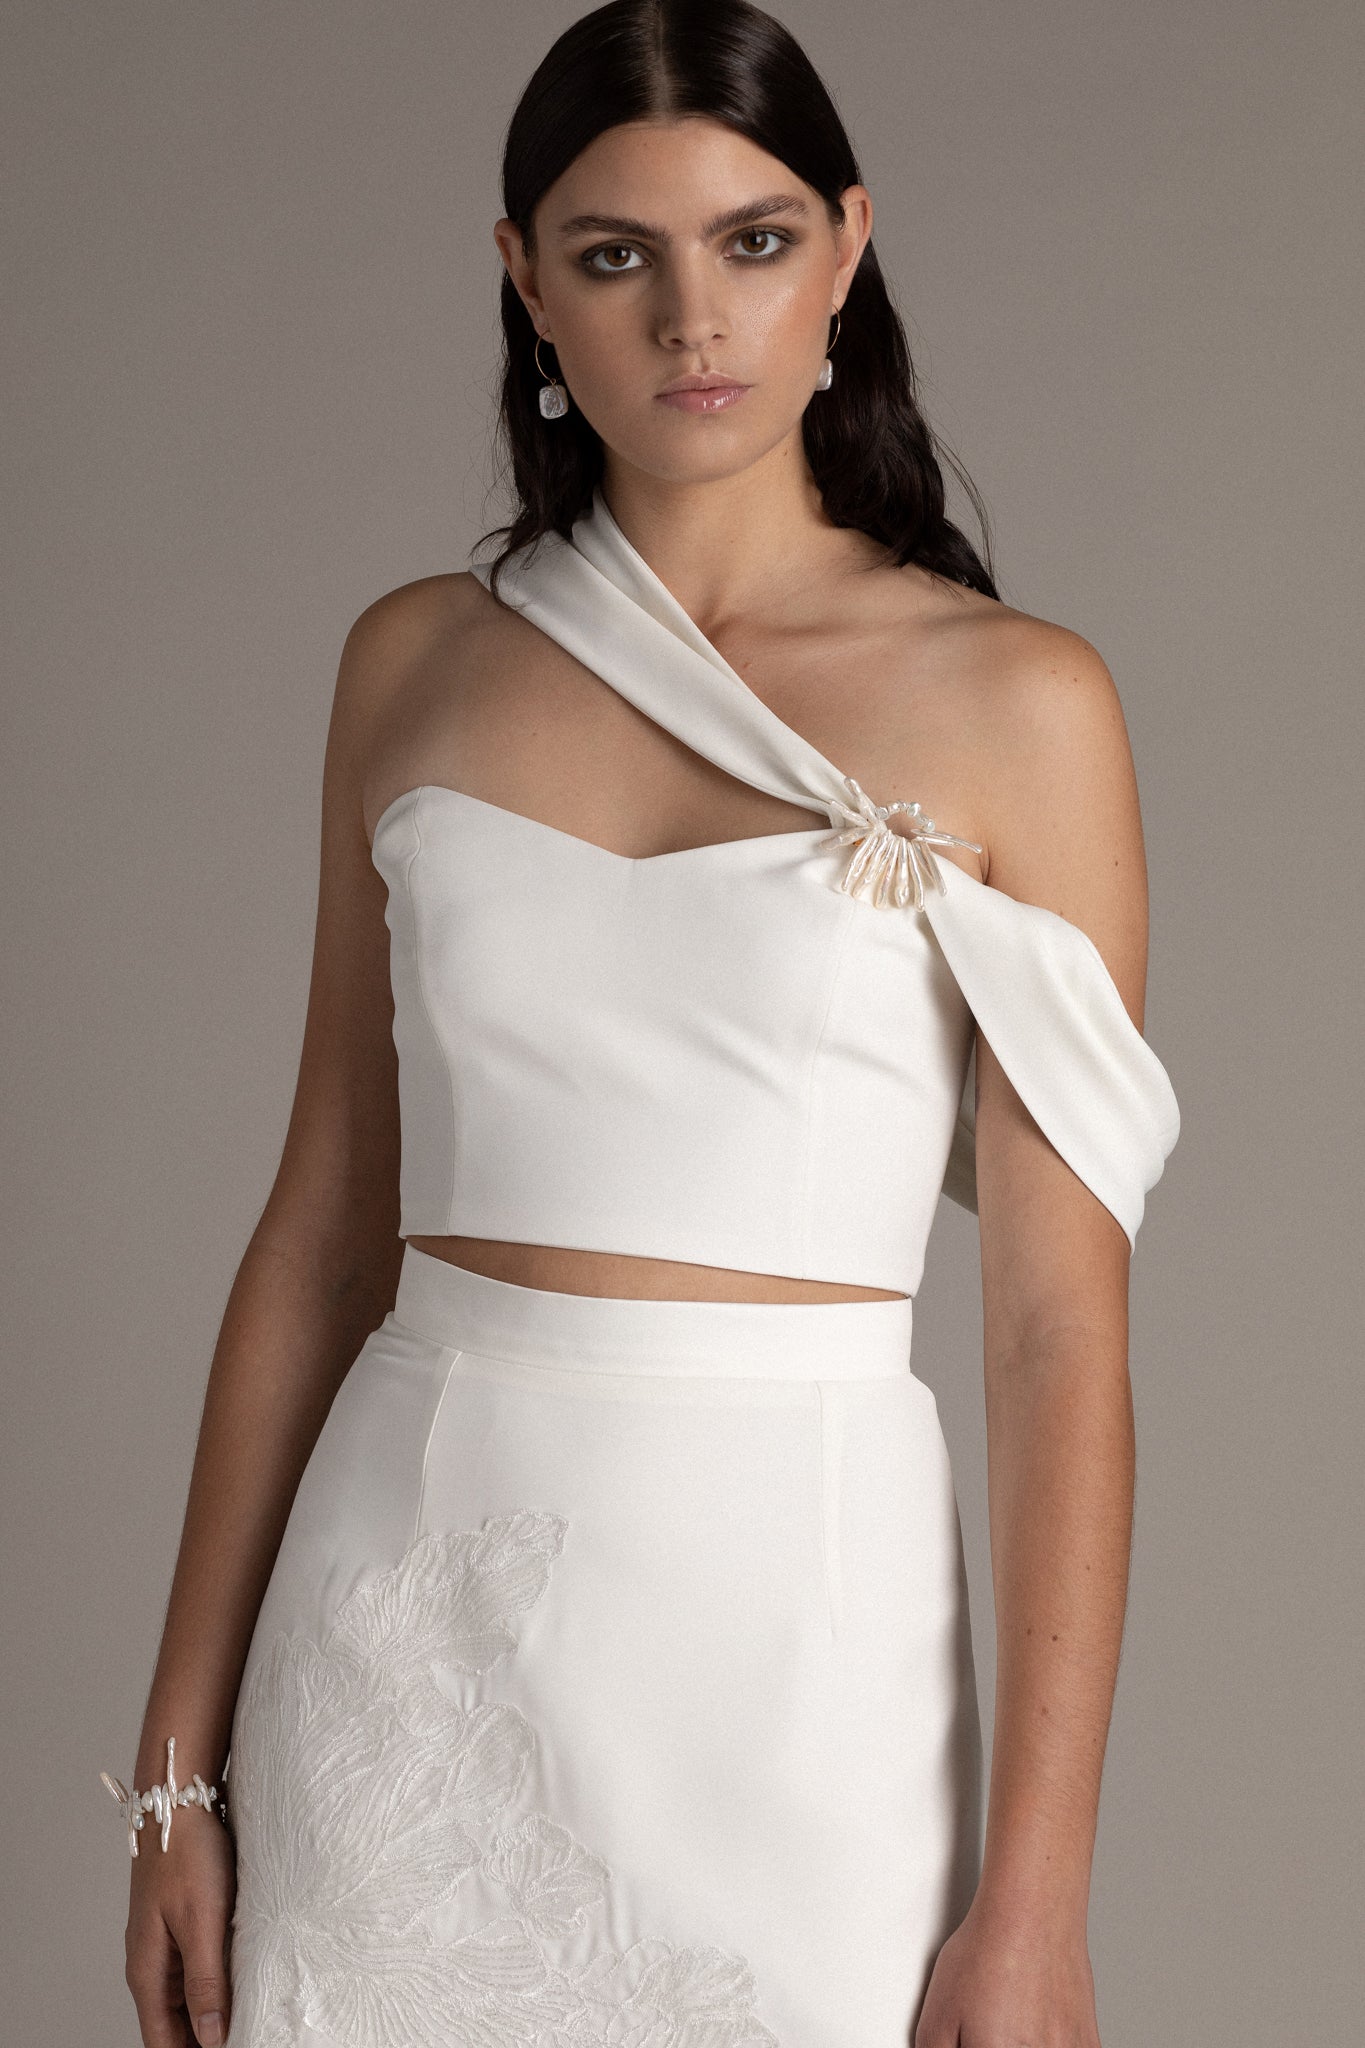 Structured Asymmetric Bodice is a statement piece that commands attention when paired with pants or a skirt. The asymmetric shoulder details create a captivating drape that enhances your silhouette.